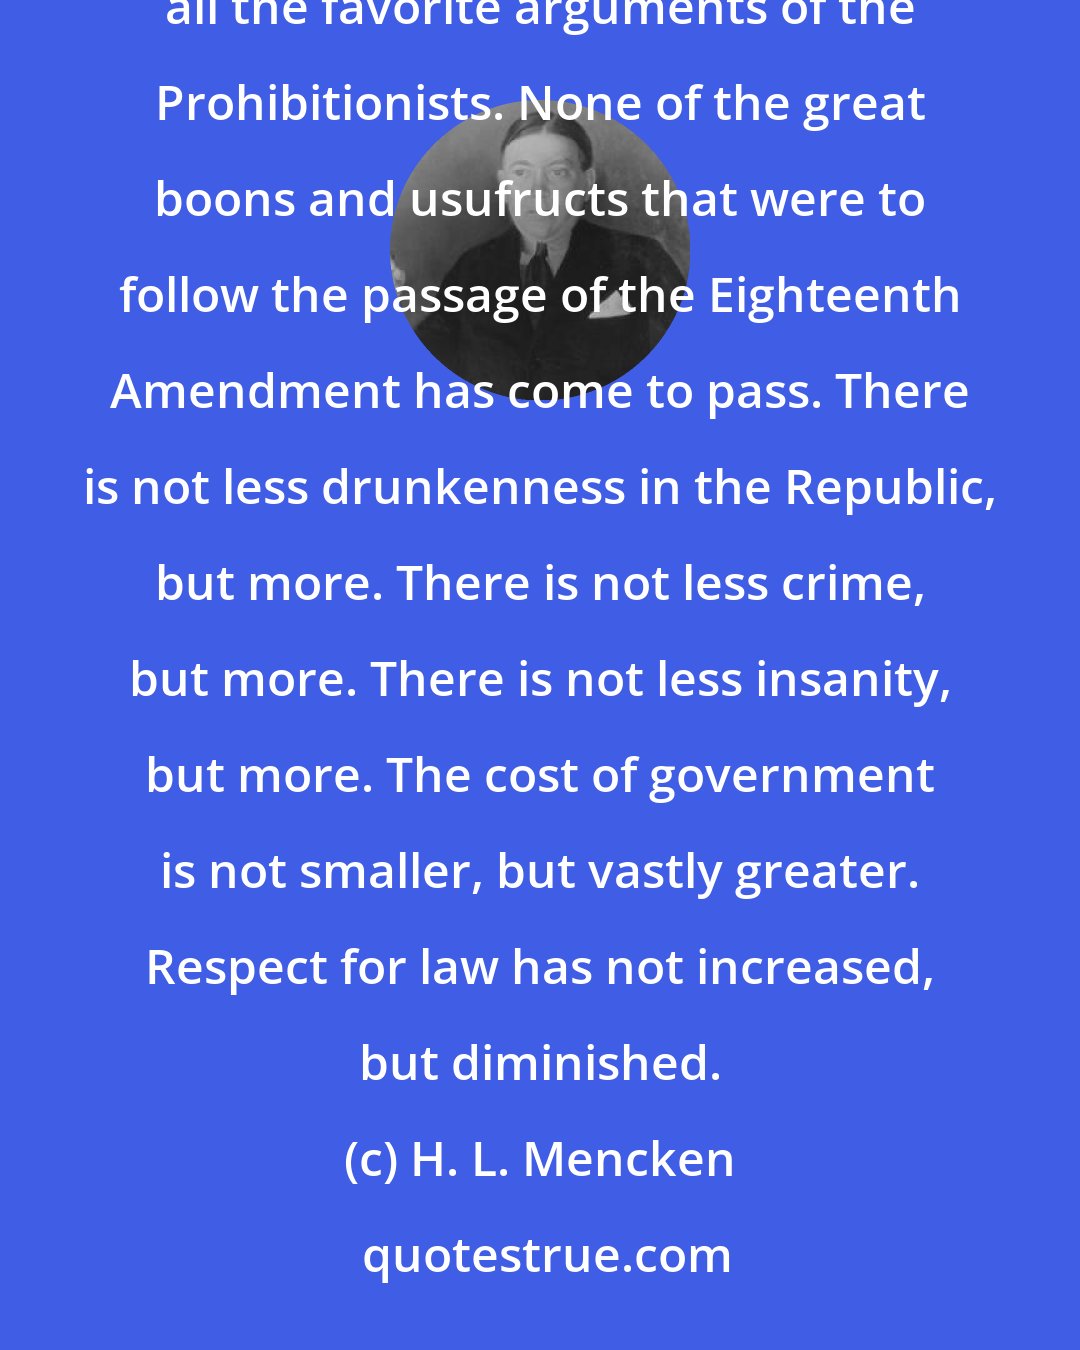 H. L. Mencken: Five years of Prohibition have had, at least, this one benign effect: they have completely disposed of all the favorite arguments of the Prohibitionists. None of the great boons and usufructs that were to follow the passage of the Eighteenth Amendment has come to pass. There is not less drunkenness in the Republic, but more. There is not less crime, but more. There is not less insanity, but more. The cost of government is not smaller, but vastly greater. Respect for law has not increased, but diminished.